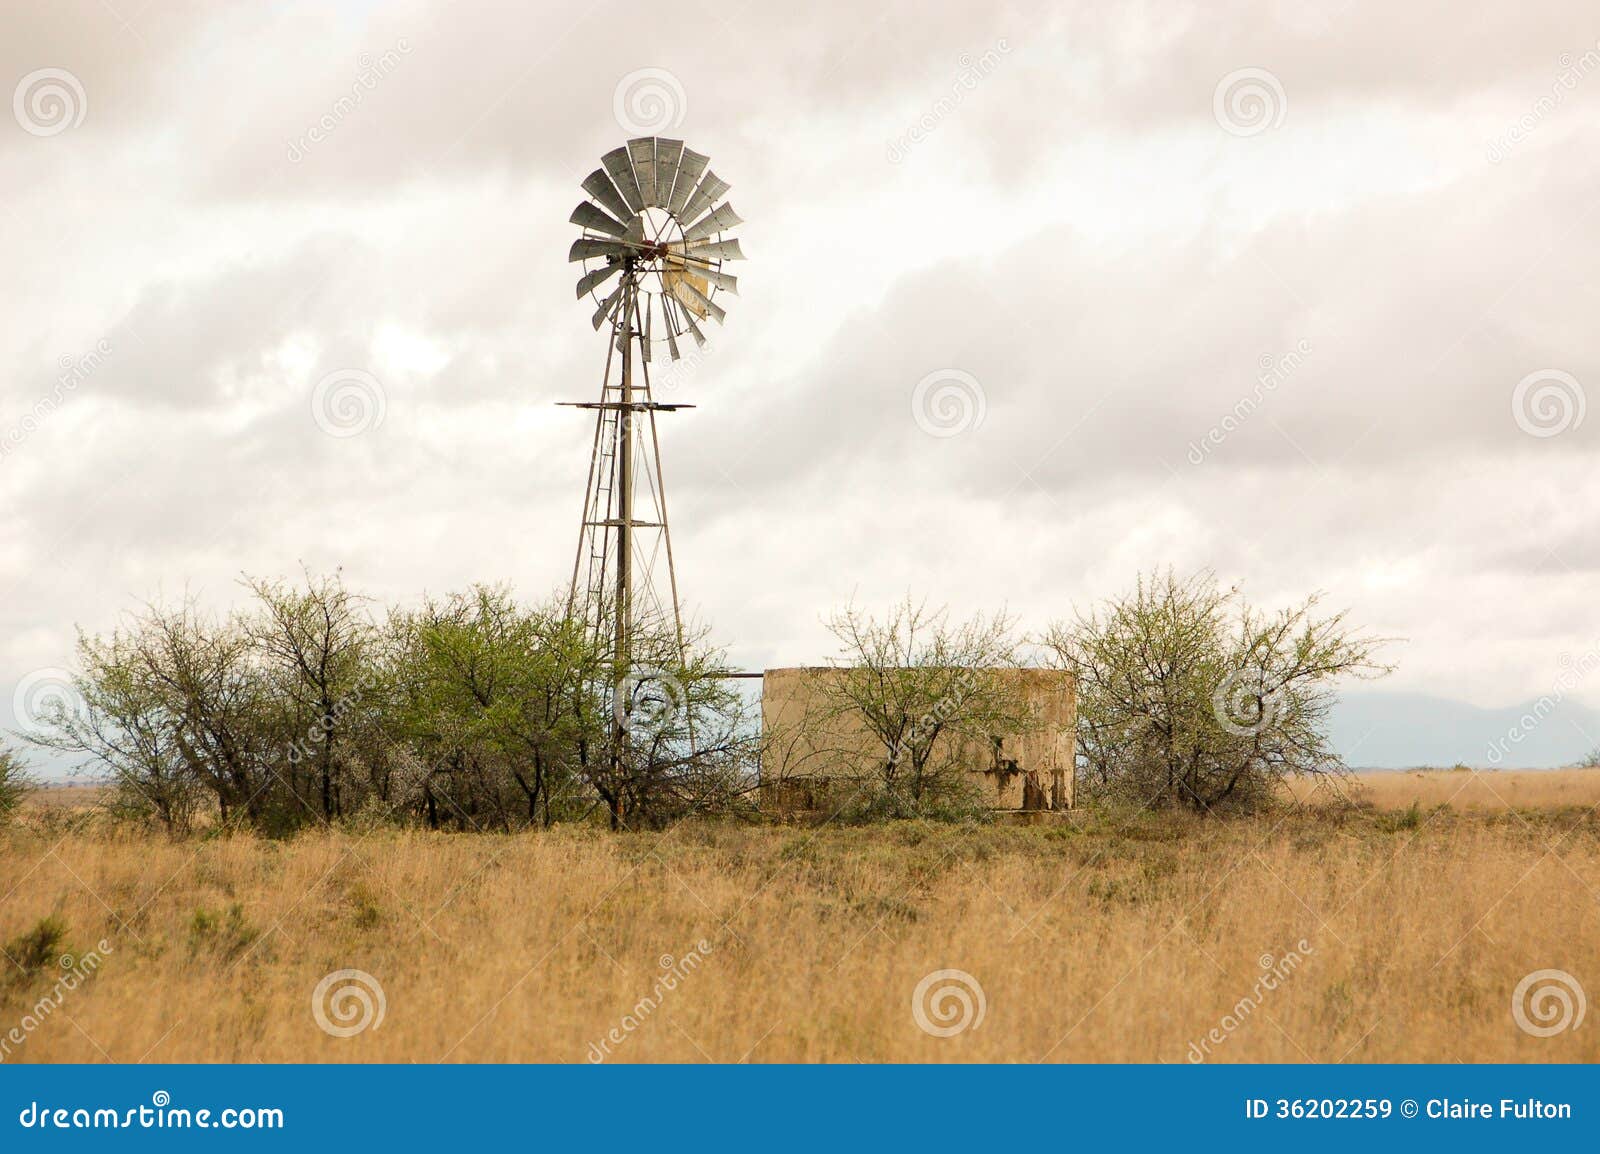  Karoo region of South Africa with windmill water pump and round dam